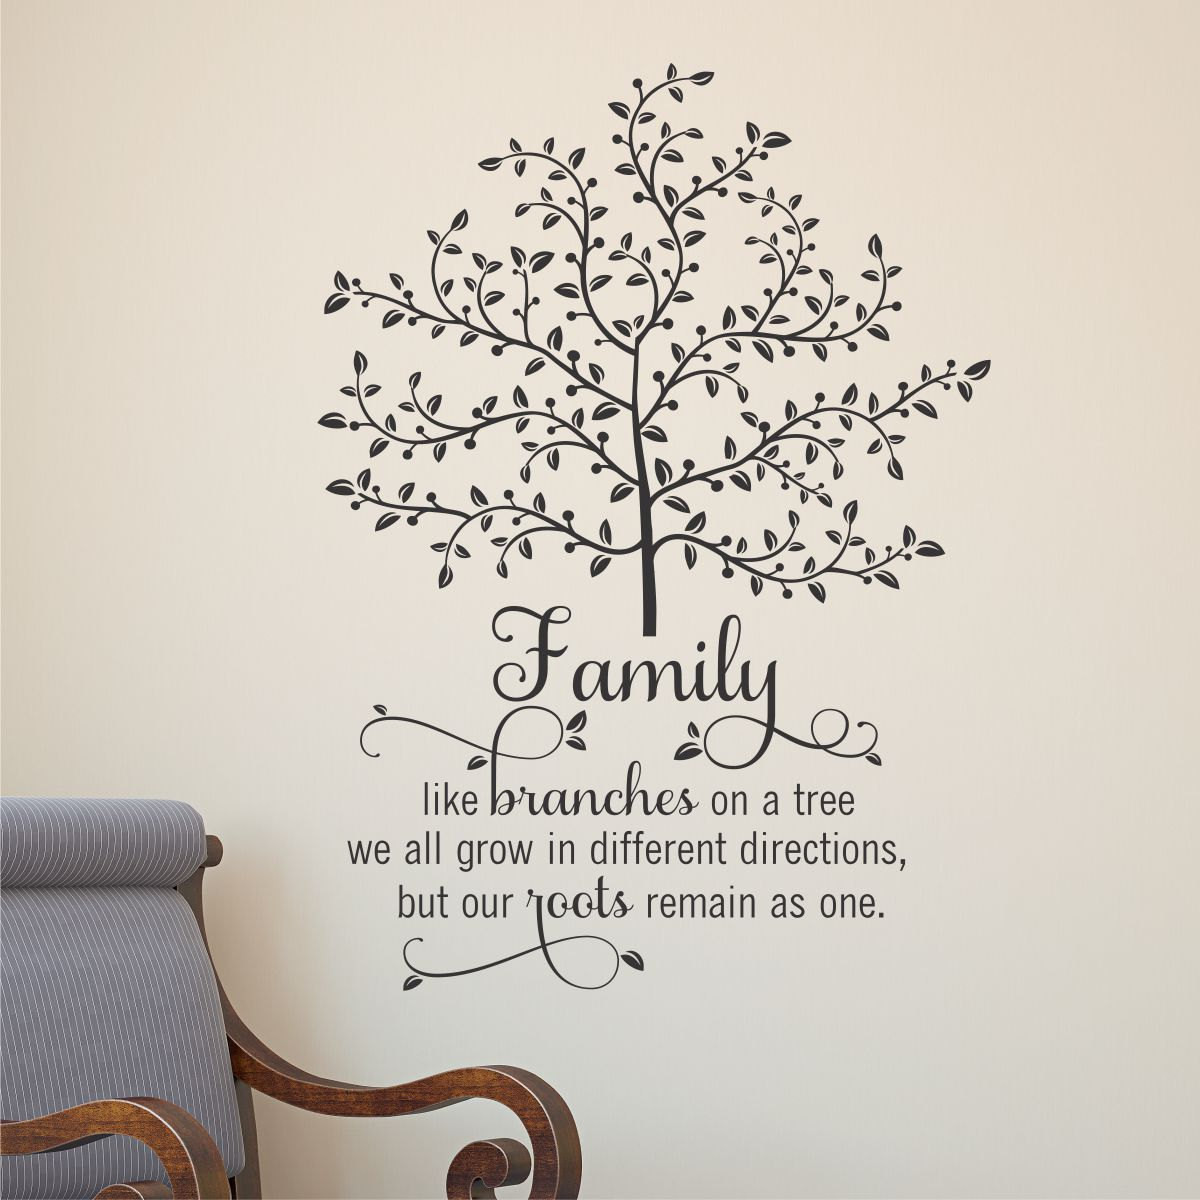 Family Tree Quote
 Wall Quote Decal Family Tree With Roots Branches Home Wall